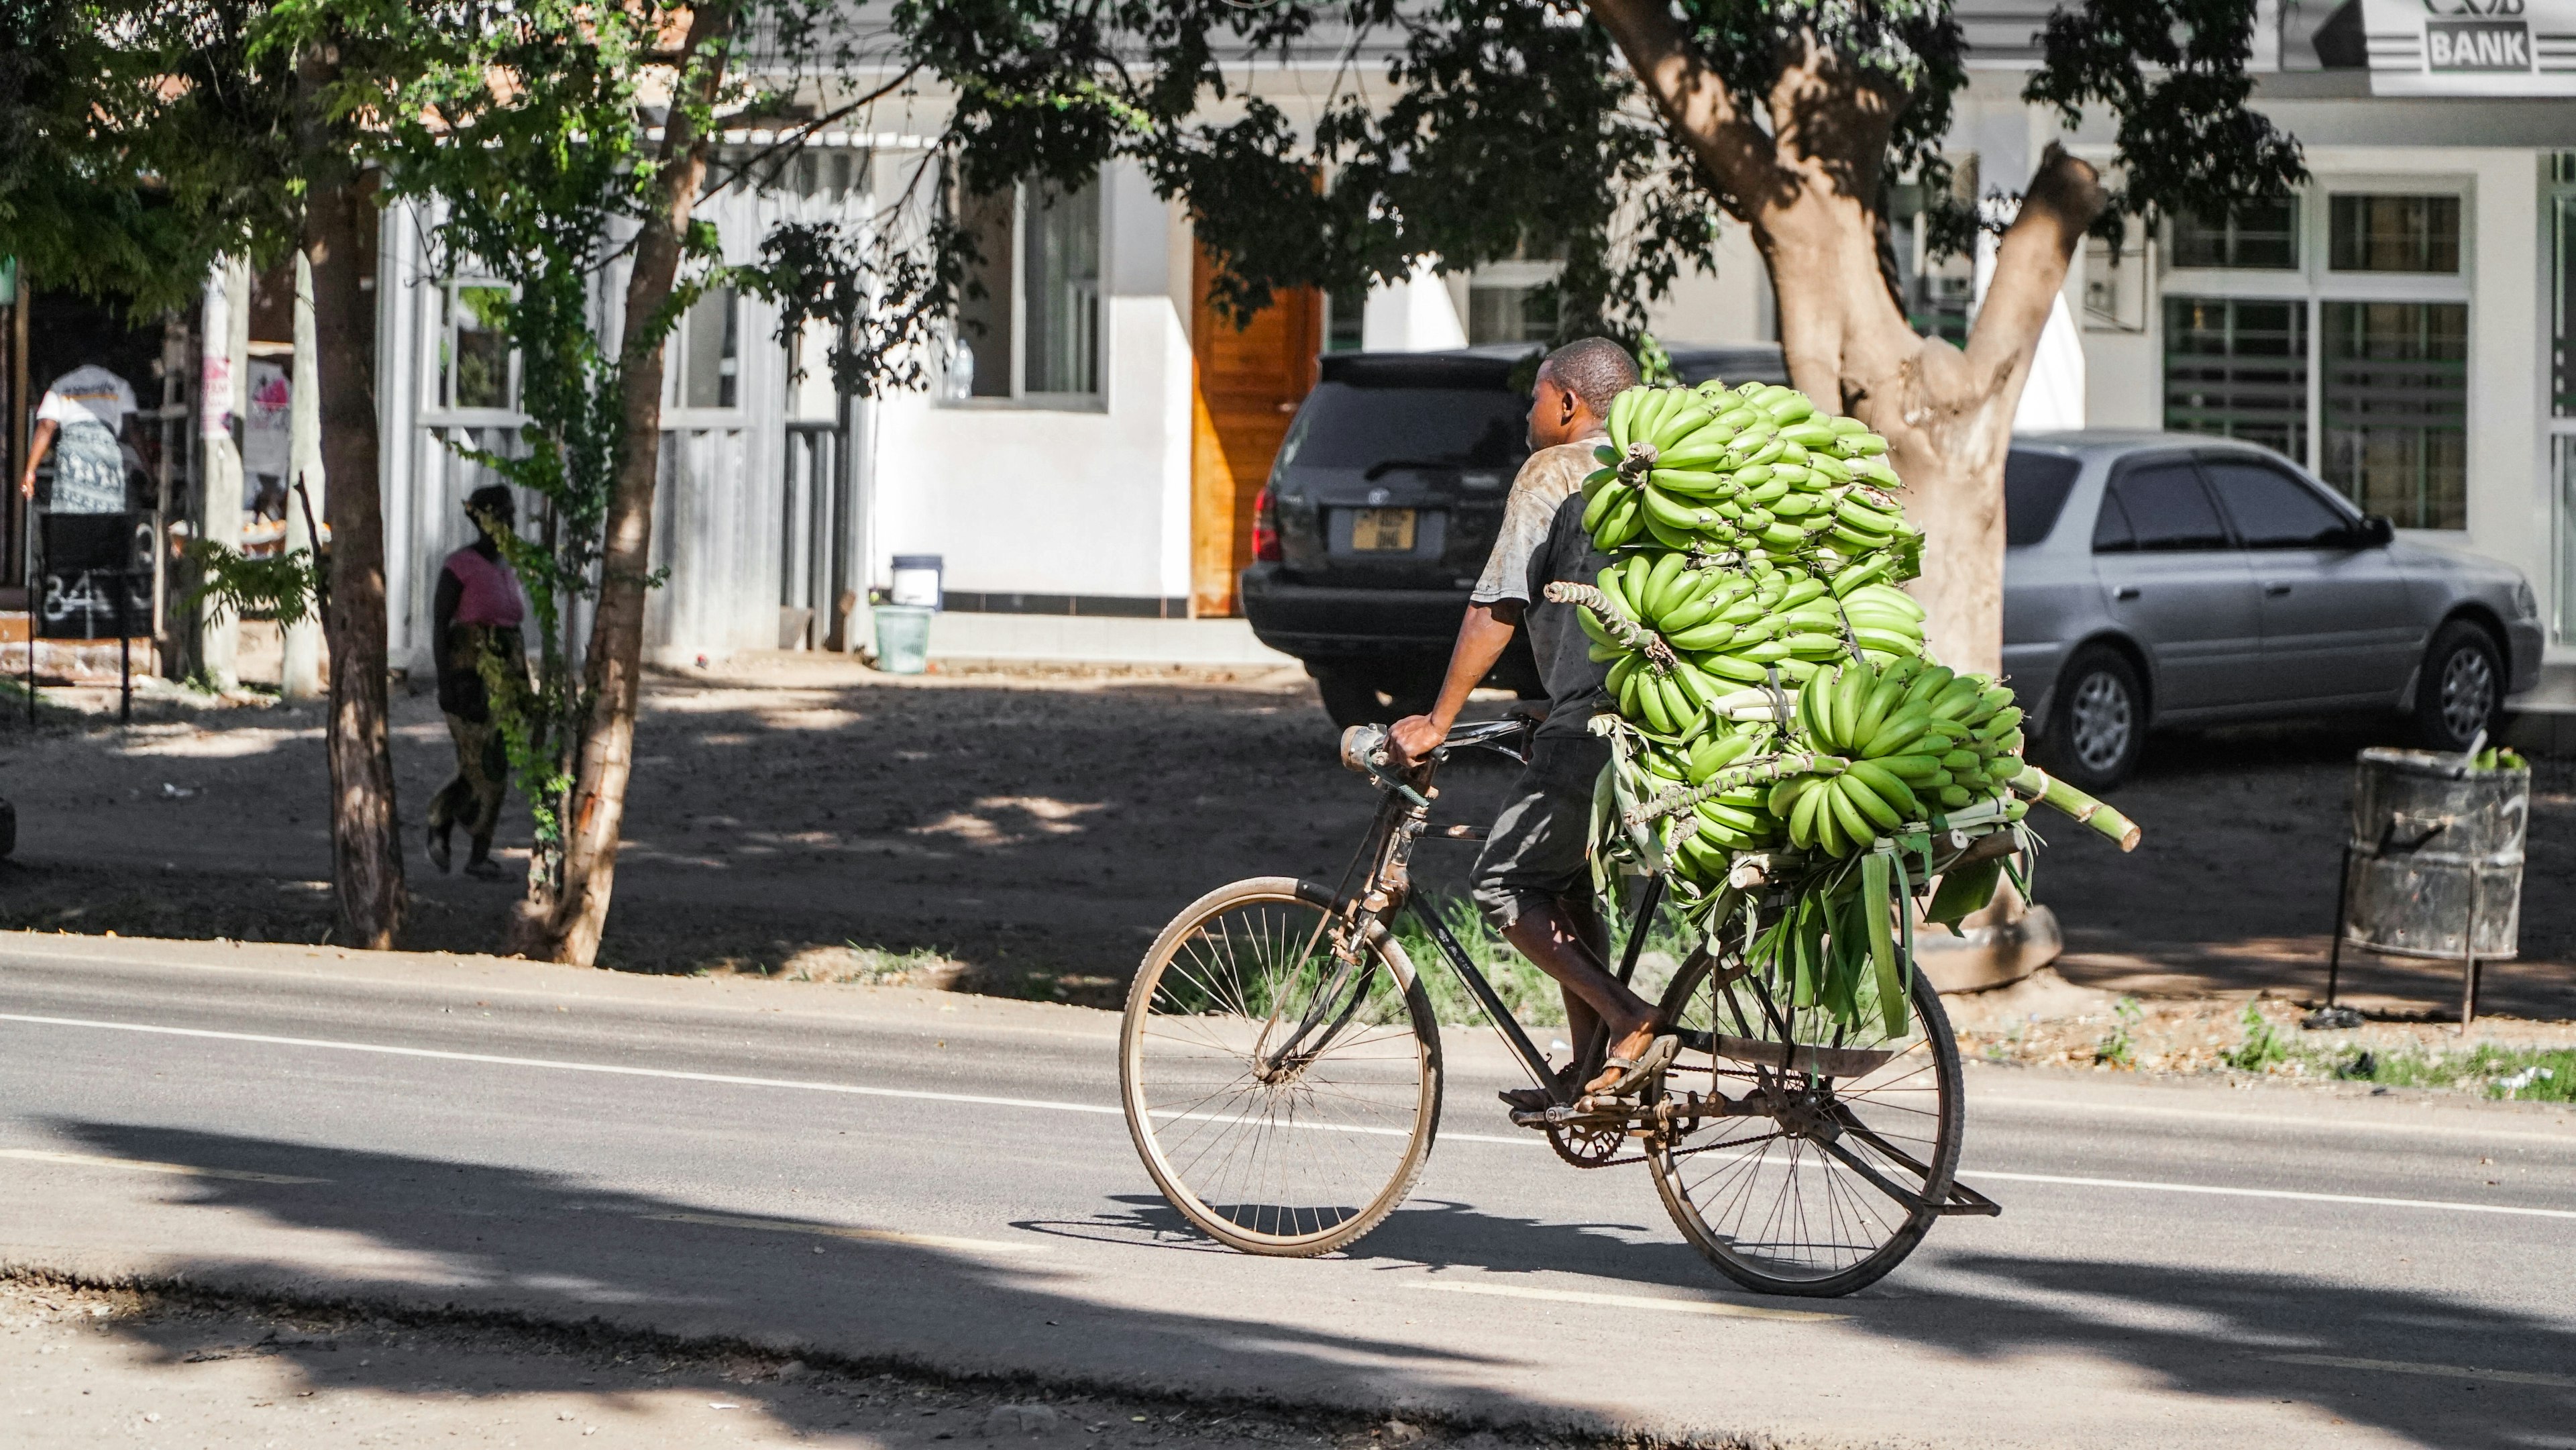 man on bicycle with bunch of bananas